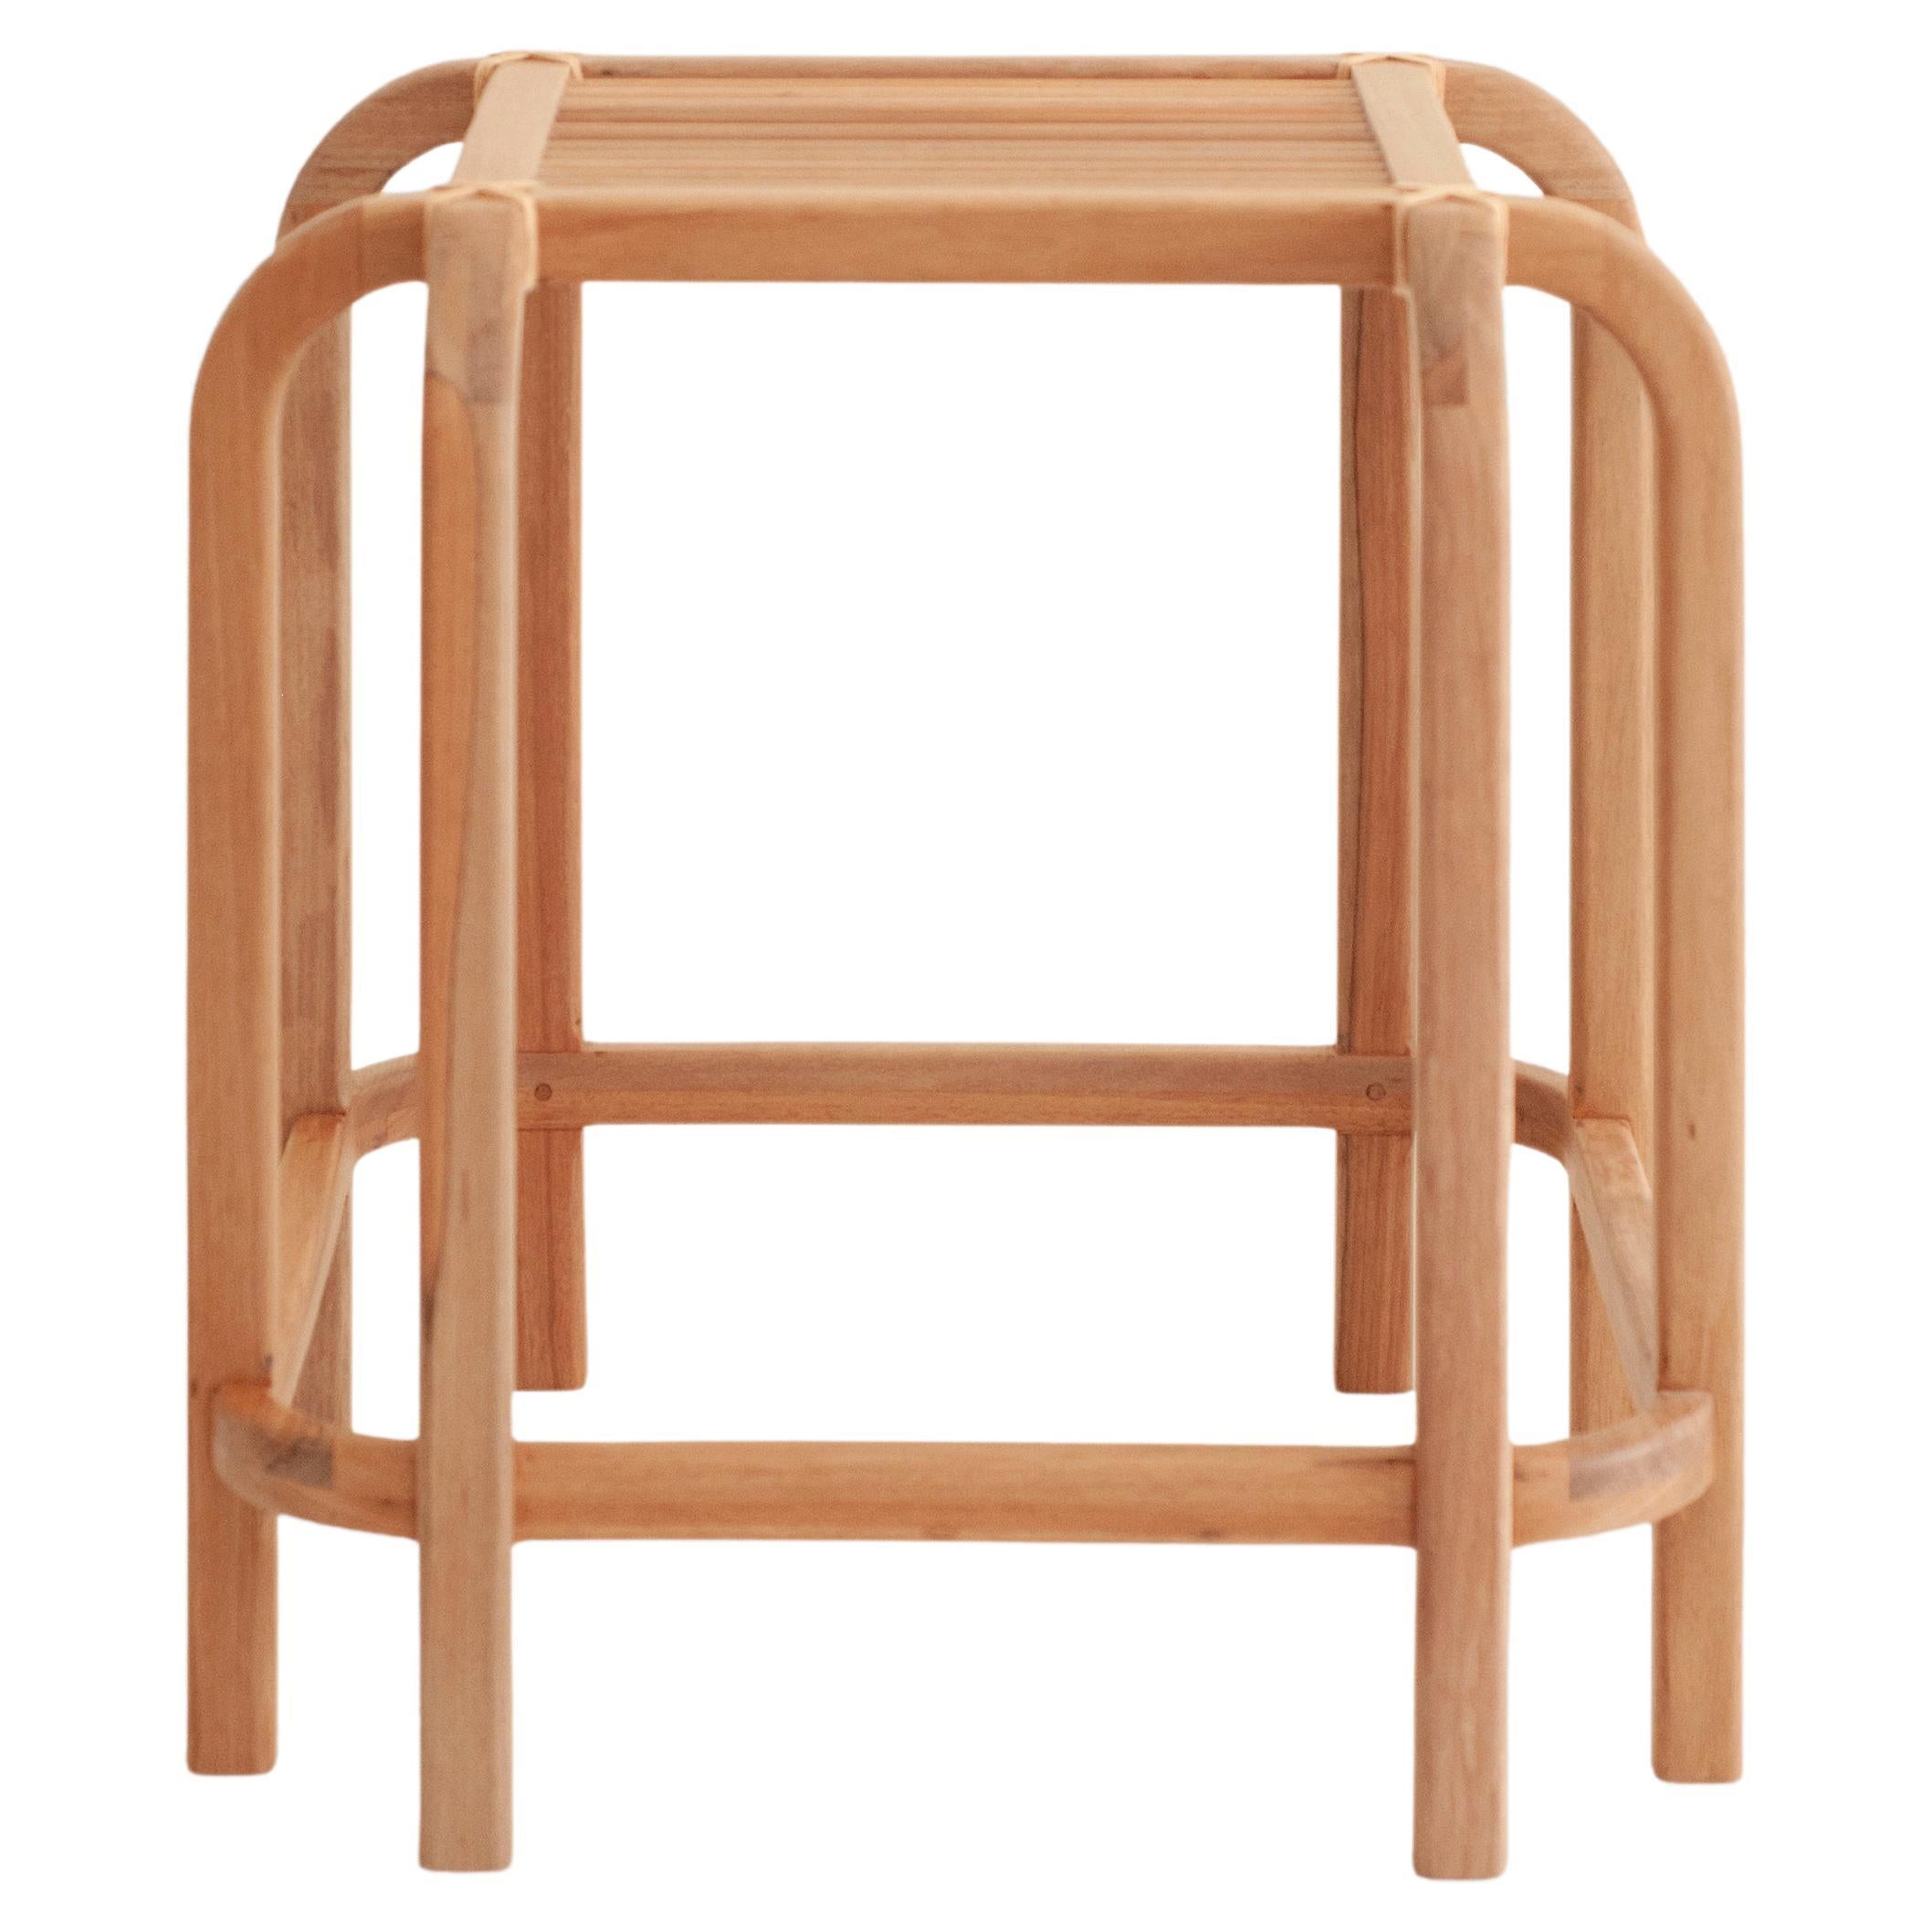 Embira High Stool: made in Brazil with pink jequitba wood and natural dyed yarns